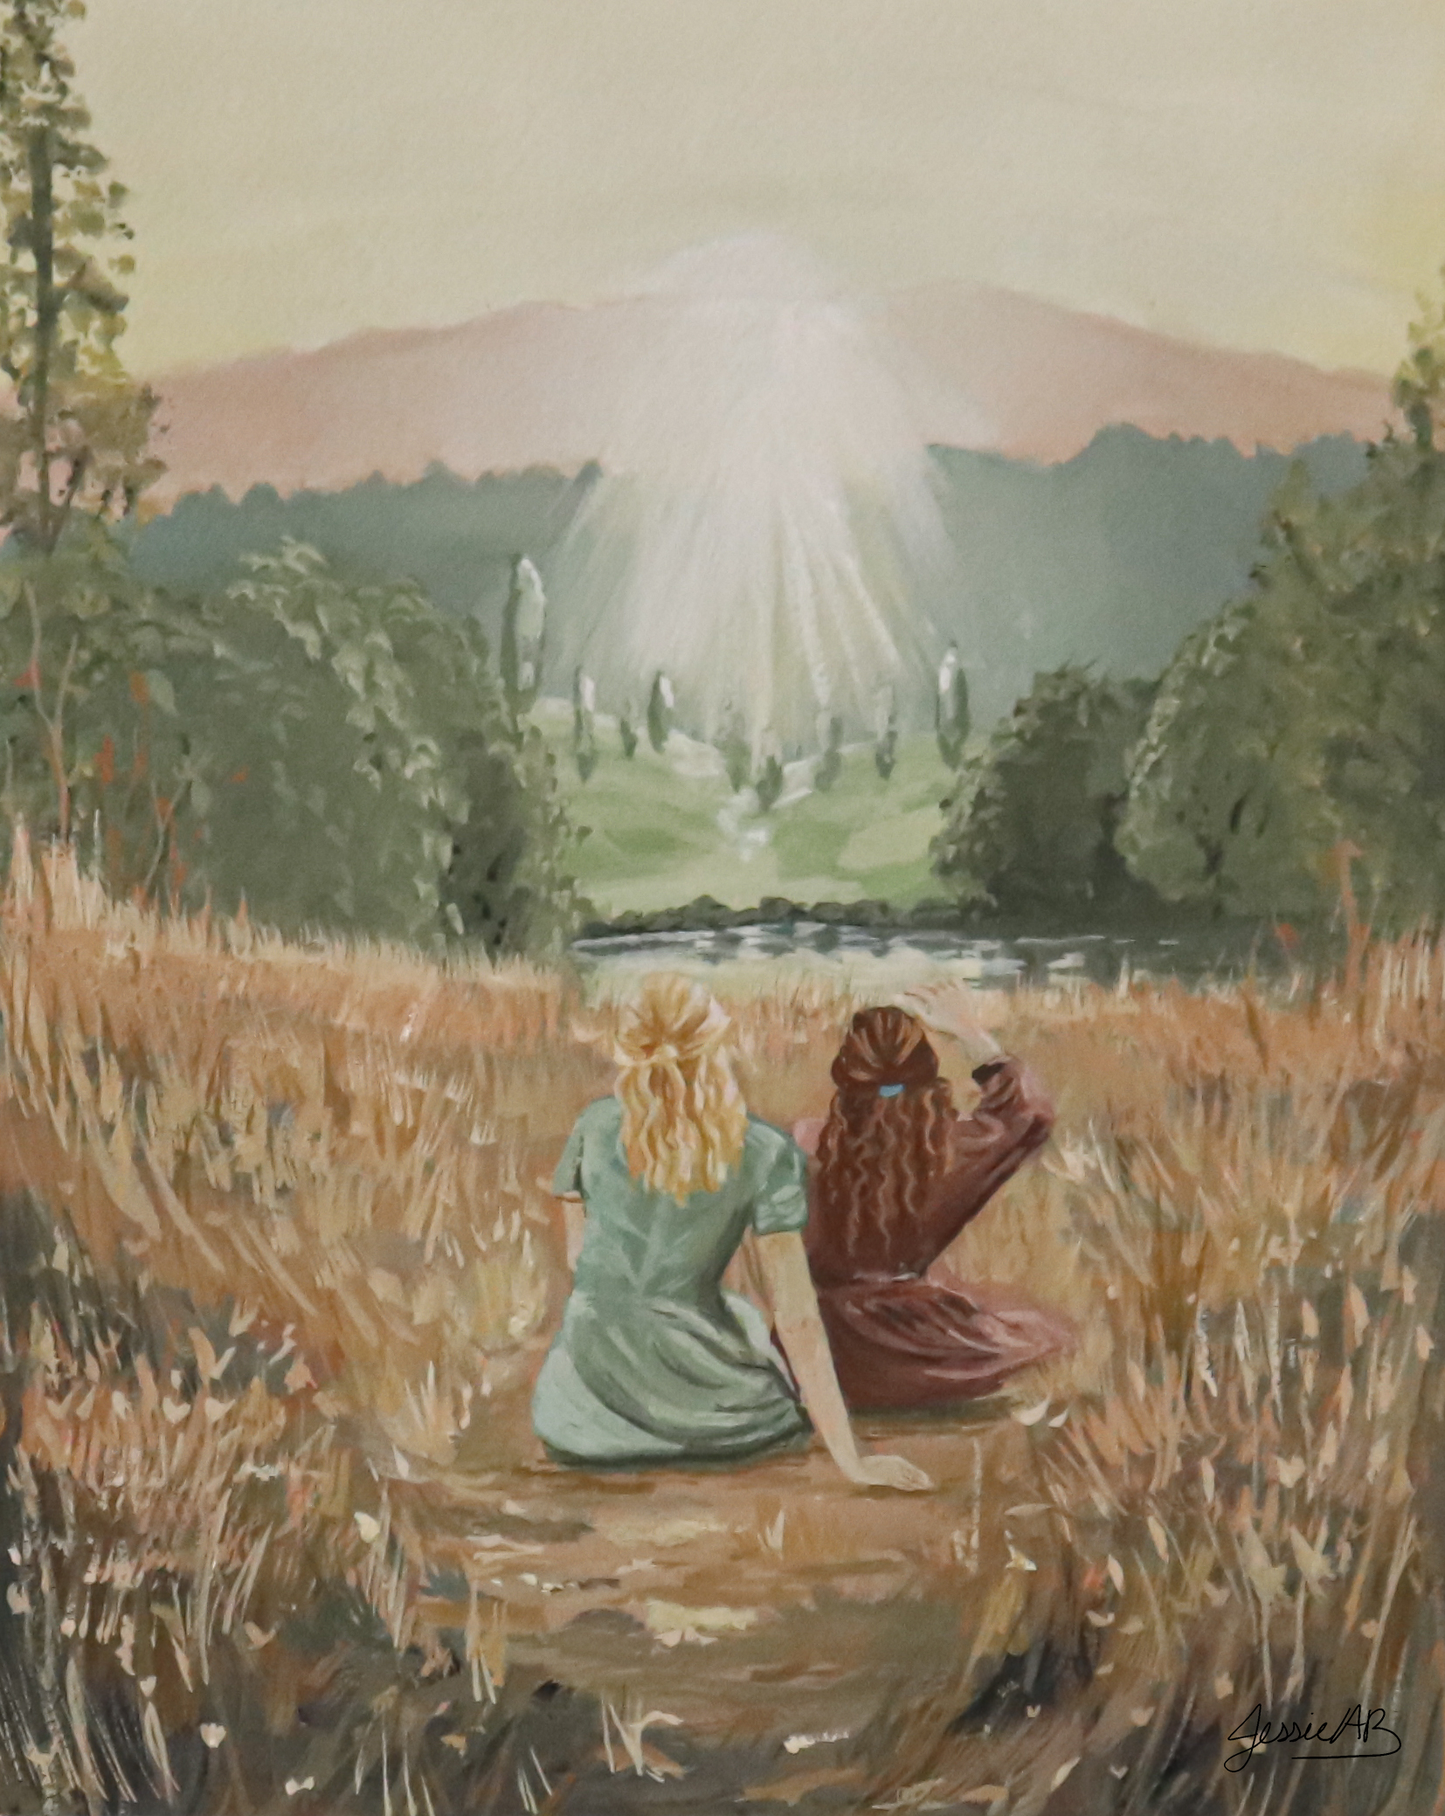 Gentle Whispers is an original 10.5" by 8.5" gouache painting by Jessie Bettersworth.